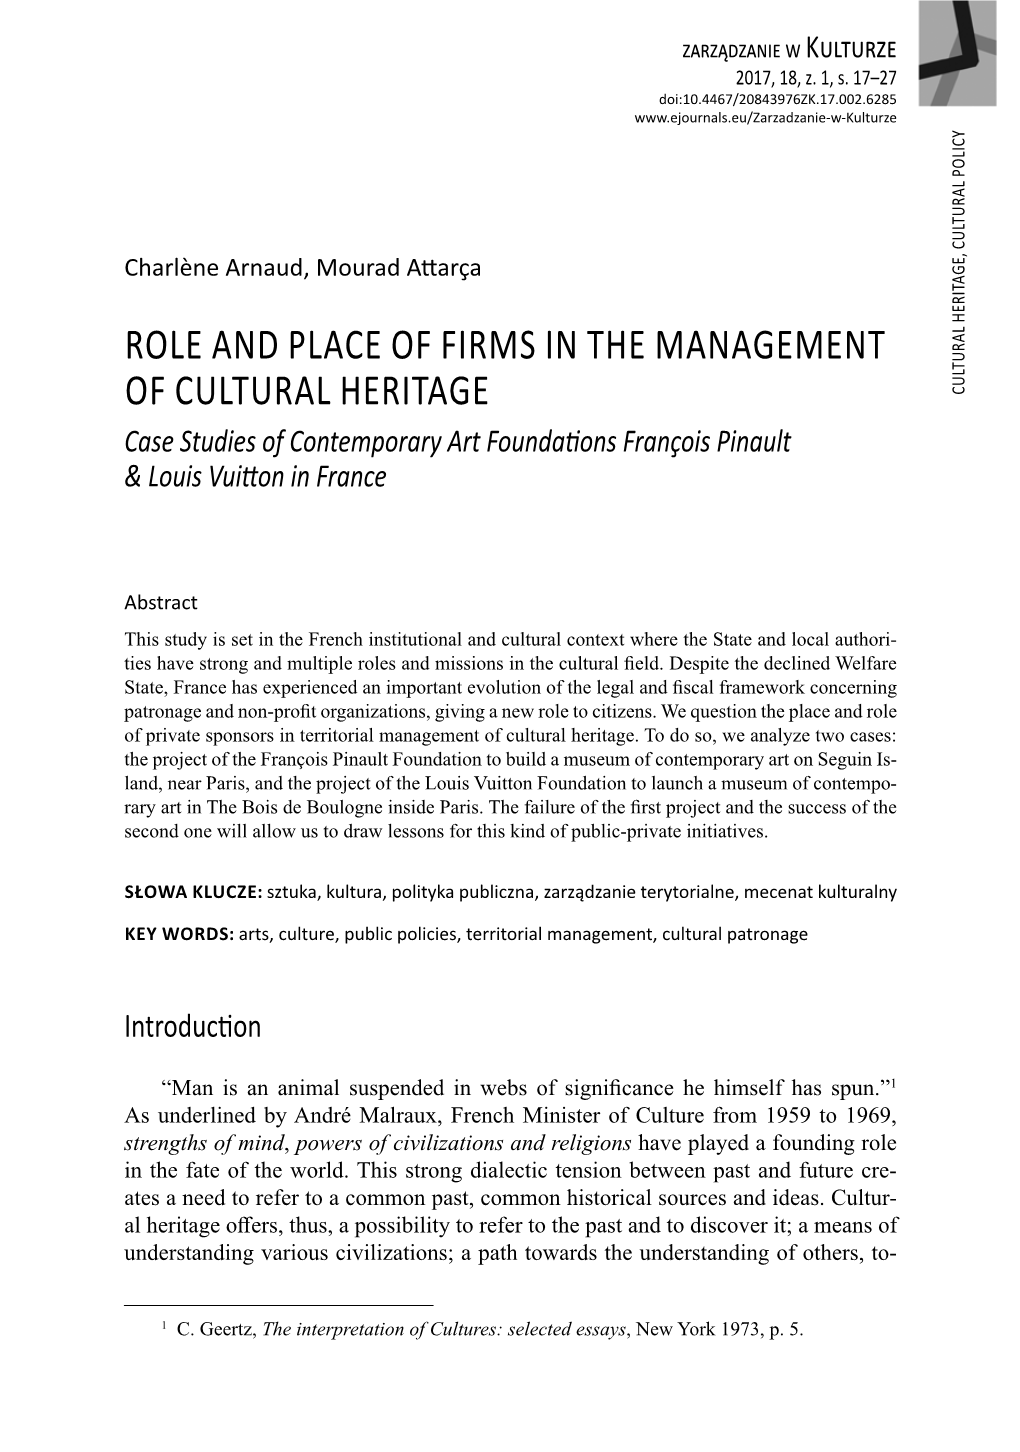 Role and Place of Firms in the Management of Cultural